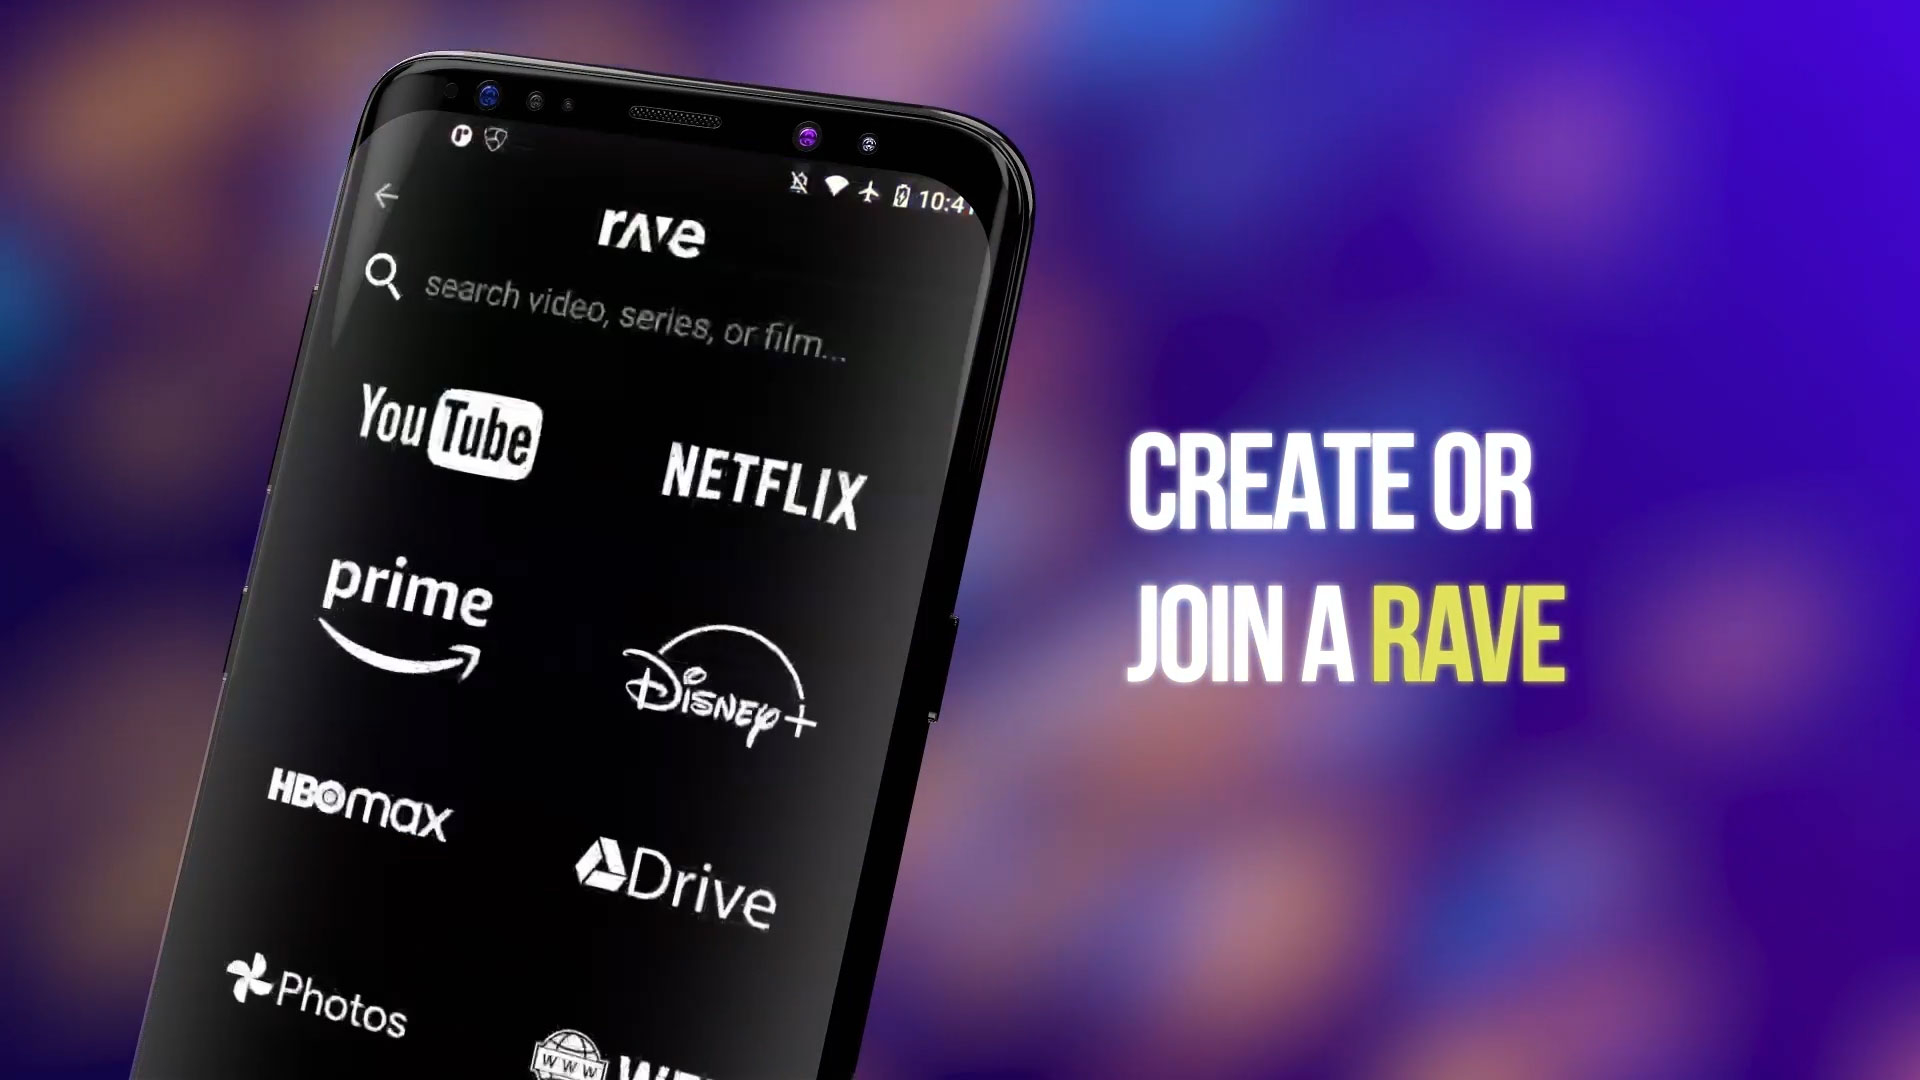 Rave enables users from around the world to stream their favorite content from YouTube, Netflix, Disney+, Amazon Prime, HBO Max & more together while talking and texting.